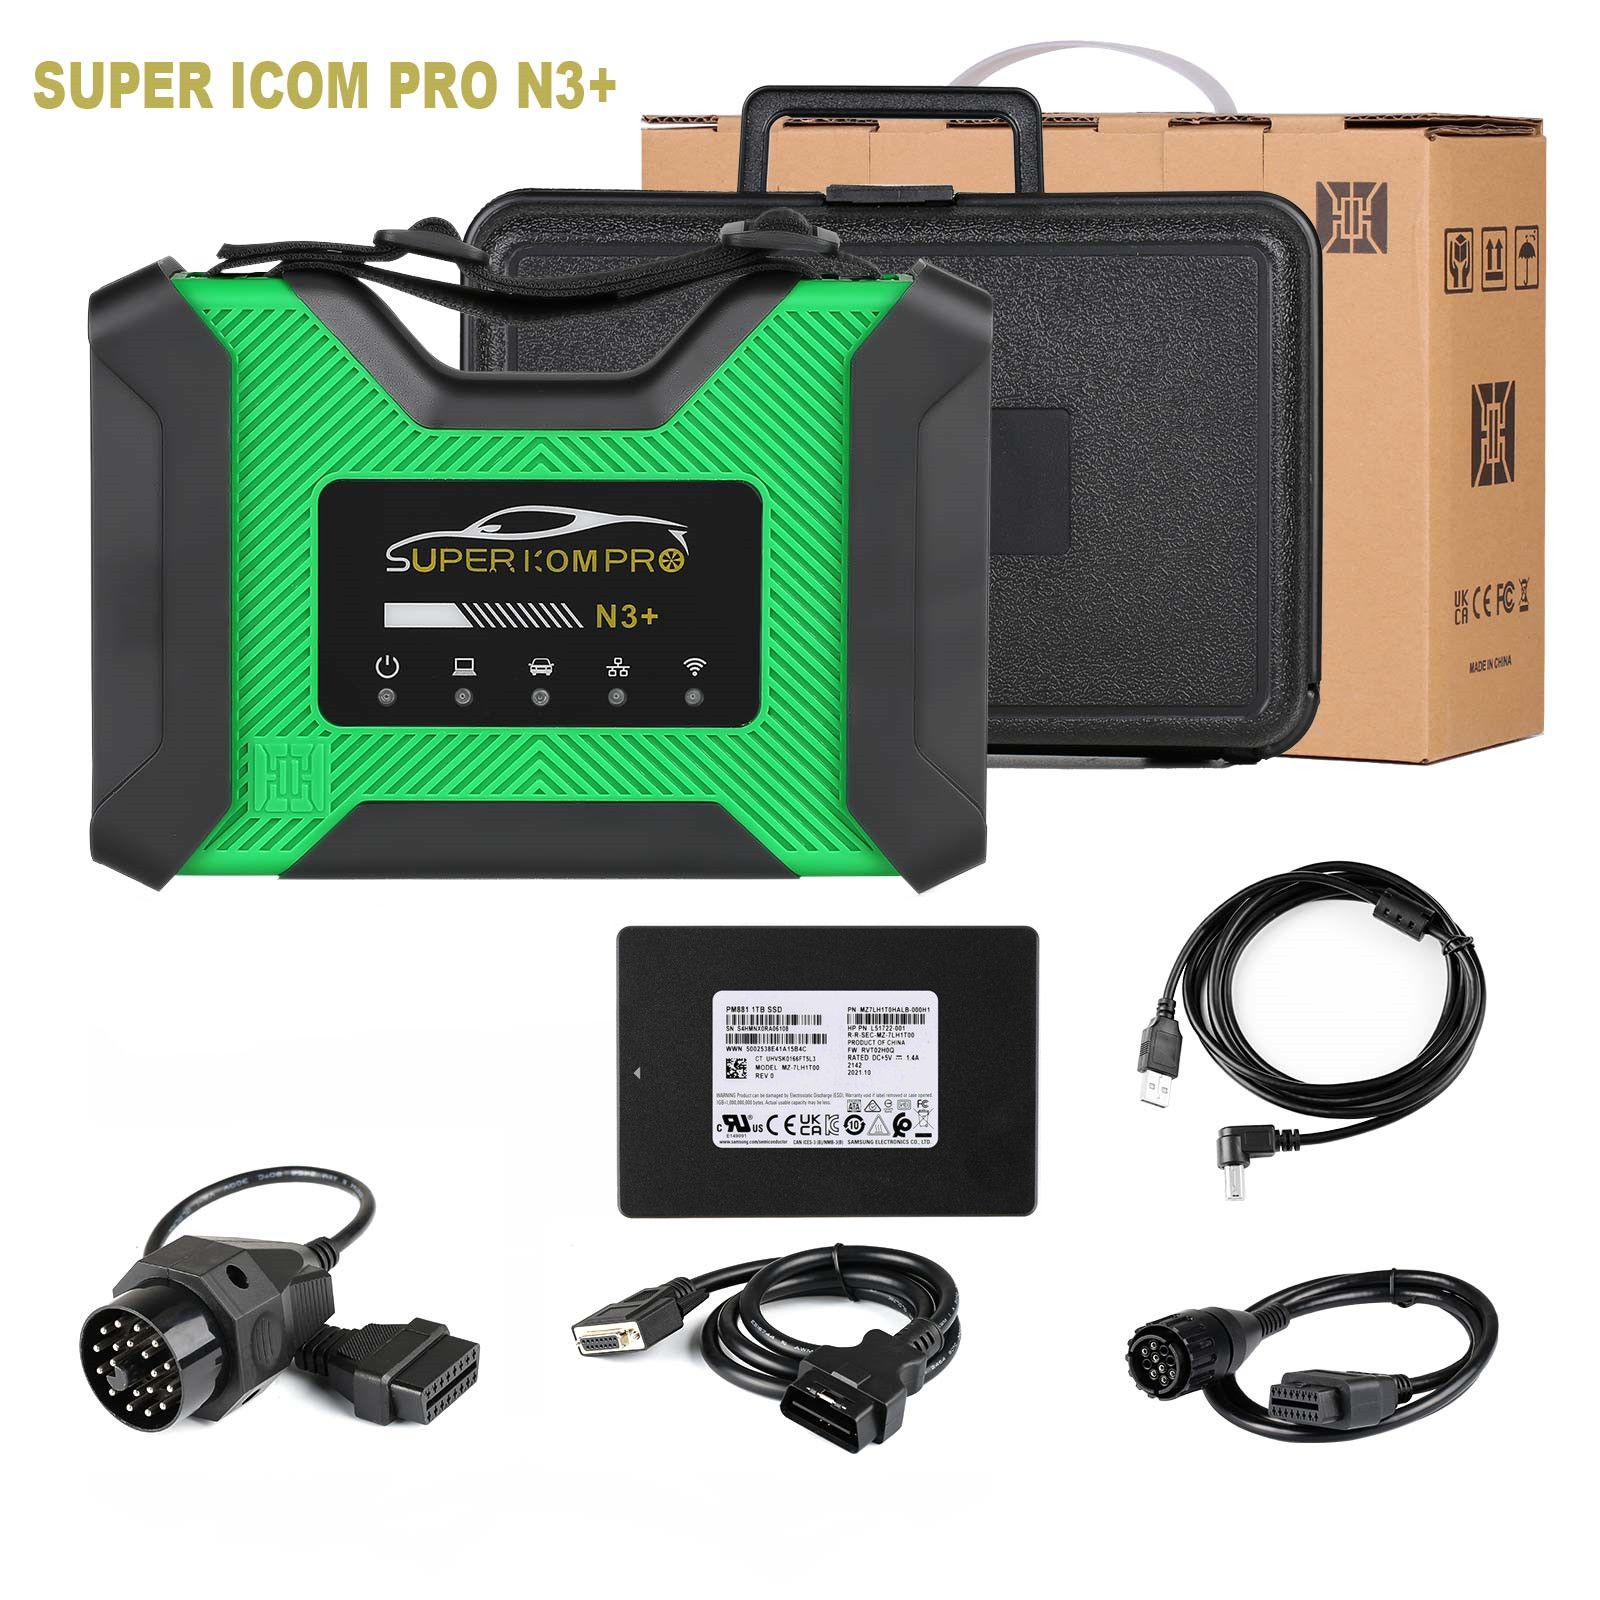 SUPER ICOM PRO N3+ BMW Full Configuration with V2023.3 BMW ICOM Software 1TB SSD ISTA-D 4.39.31 ISTA-P 3.71.0.200 with Engineers Programming Win10